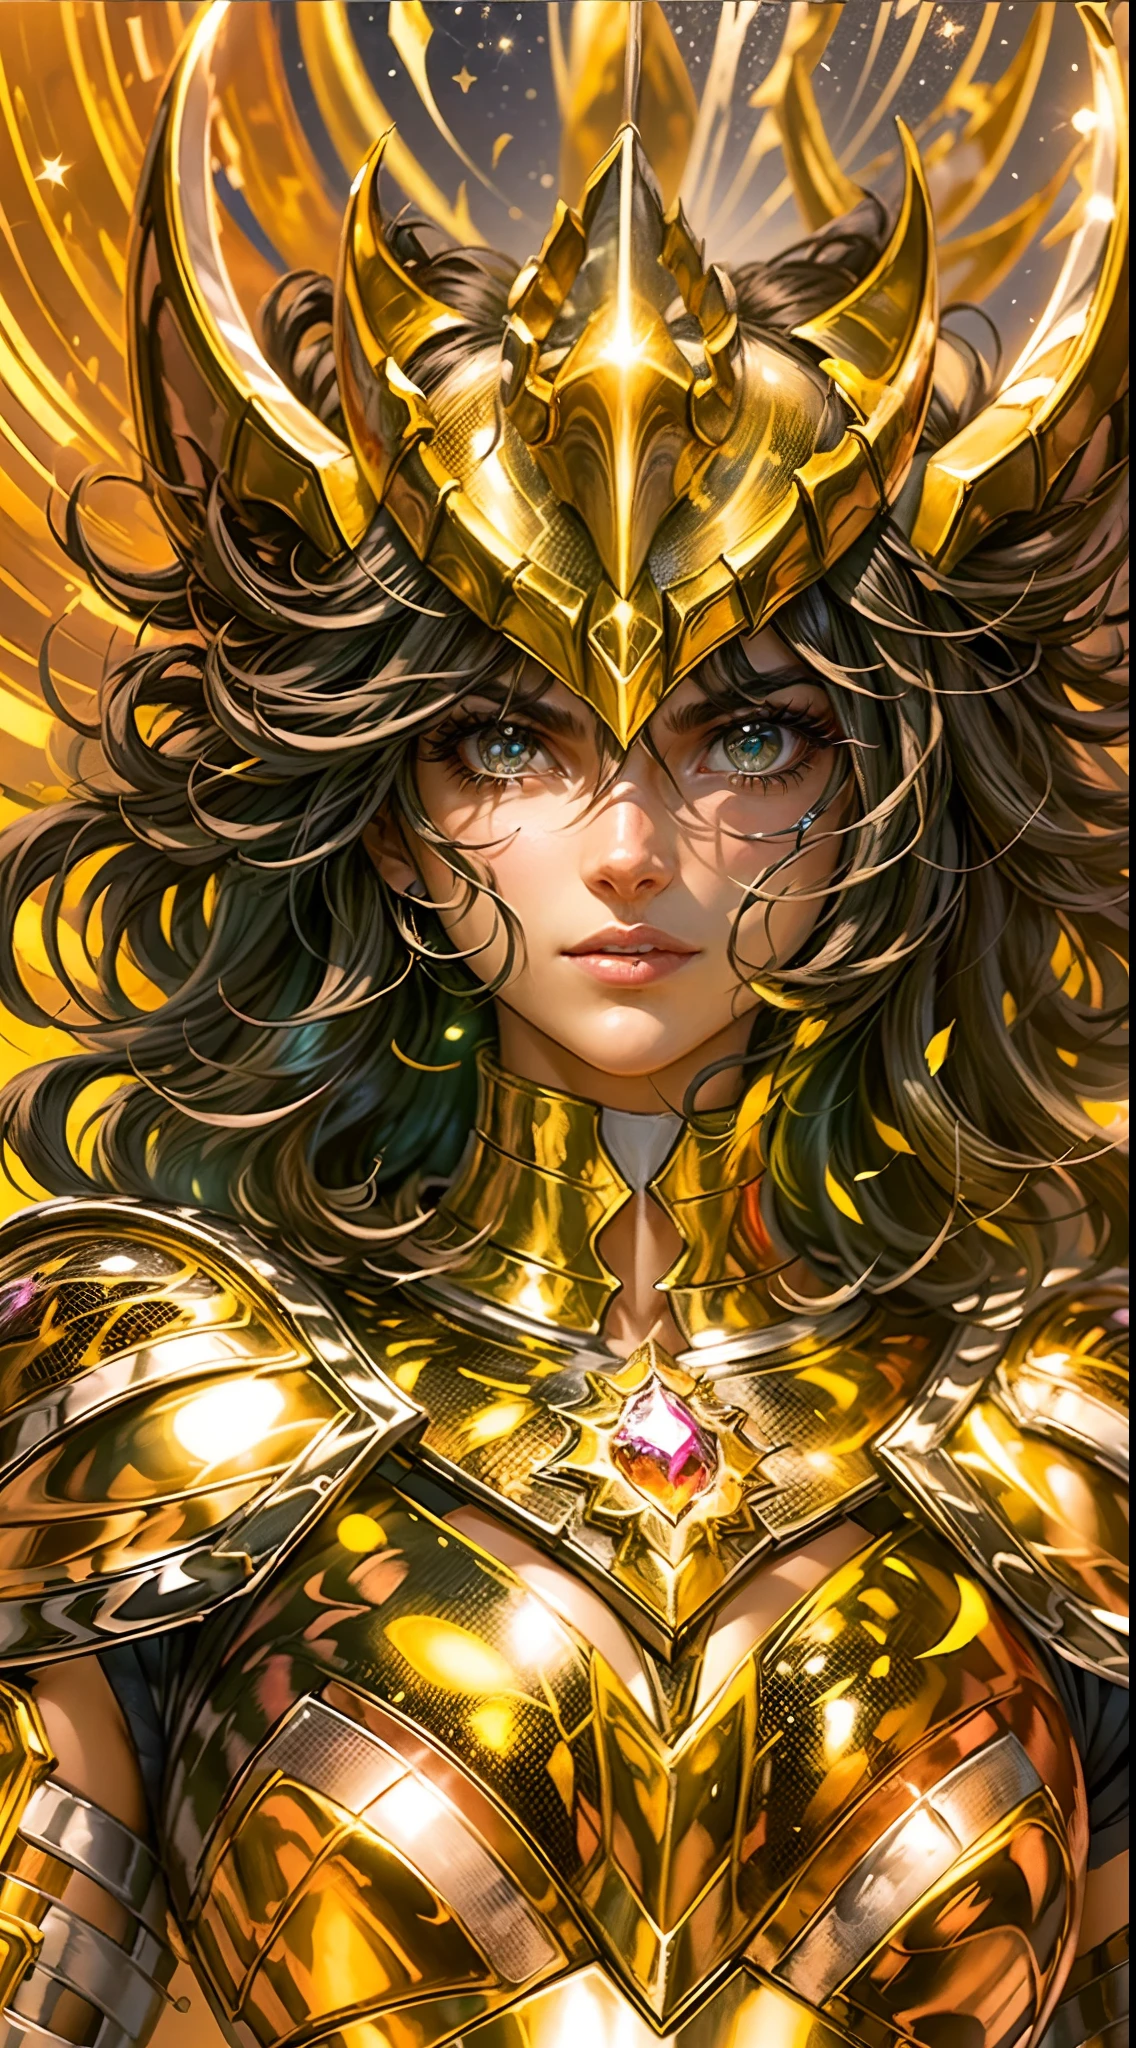 a beautiful female saint seiya, seductive body,In a bright movie light, a highly detailed depiction of Saint Seiya in their iconic Gold Armor stands out. The armor shines brilliantly with a realistic and hyper-realistic level of detail, accentuating every piece and intricacy. The Saint Seiya character stands tall, emanating a sense of power and determination, with their eyes gleaming and their lips delicately carved. The entire scene is set against a clean background, allowing the viewer's attention to be solely focused on the protagonist and their gold armor. The universe serves as the backdrop, with nebulae and stars filling the sky, creating a sense of awe and grandeur. The colors in the scene are bright and vivid, contributing to the overall visual impact. The lighting is expertly executed, highlighting the protagonist and capturing the essence of the original Saint Seiya series. The image is of the highest quality, with a resolution of 8k, ensuring every minute detail is visible. This artwork is trending and showcases the talent of the artist in creating a highly detailed and visually captivating representation of Saint Seiya in their Gold Armor.